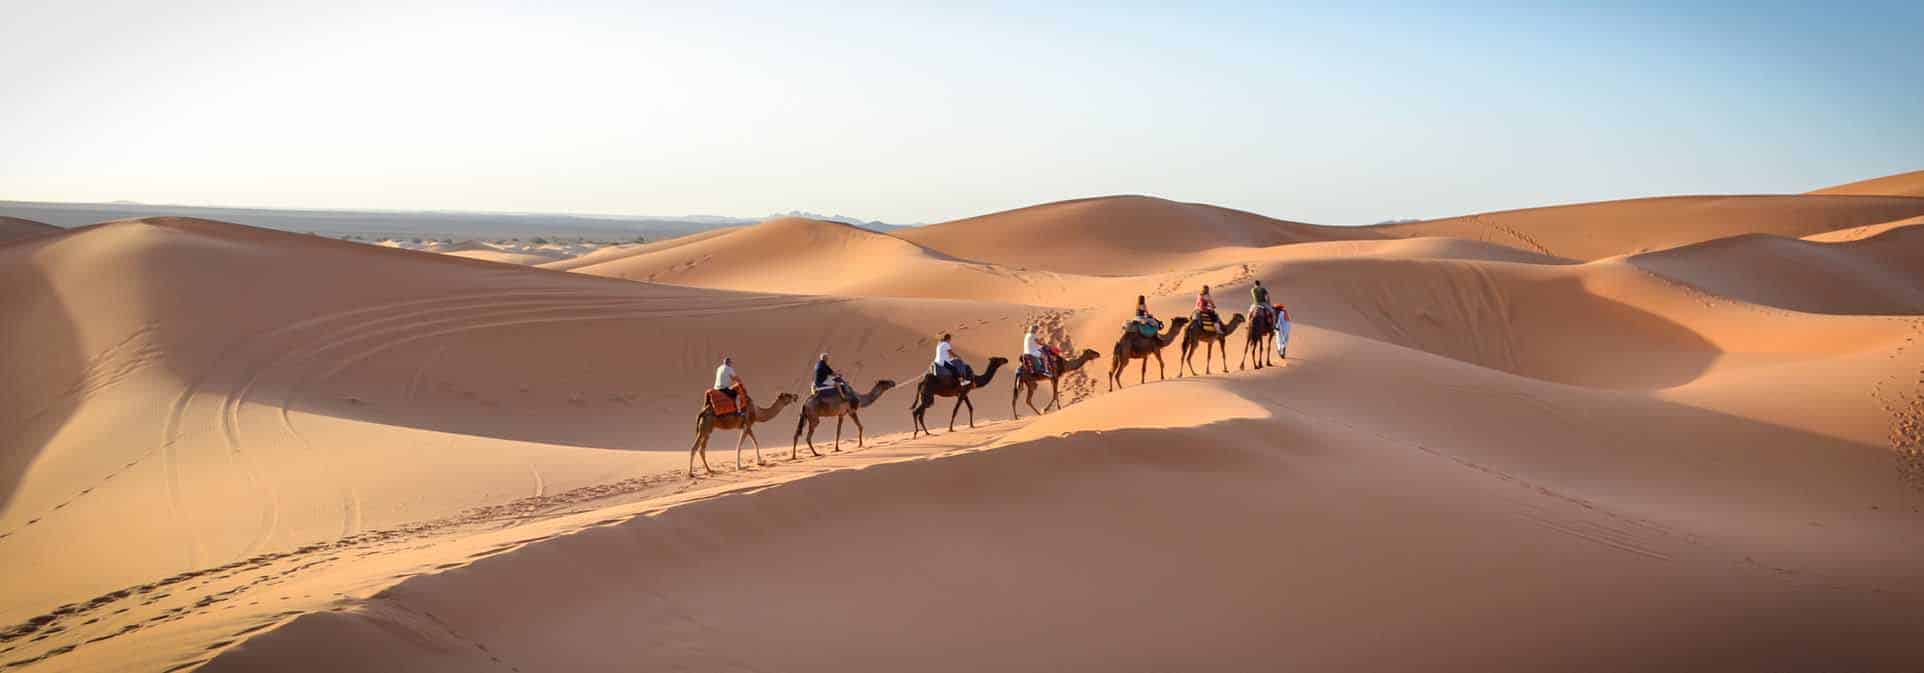 Morocco Sahara Desert Package | The Best of the North and South of Morocco 10 Days